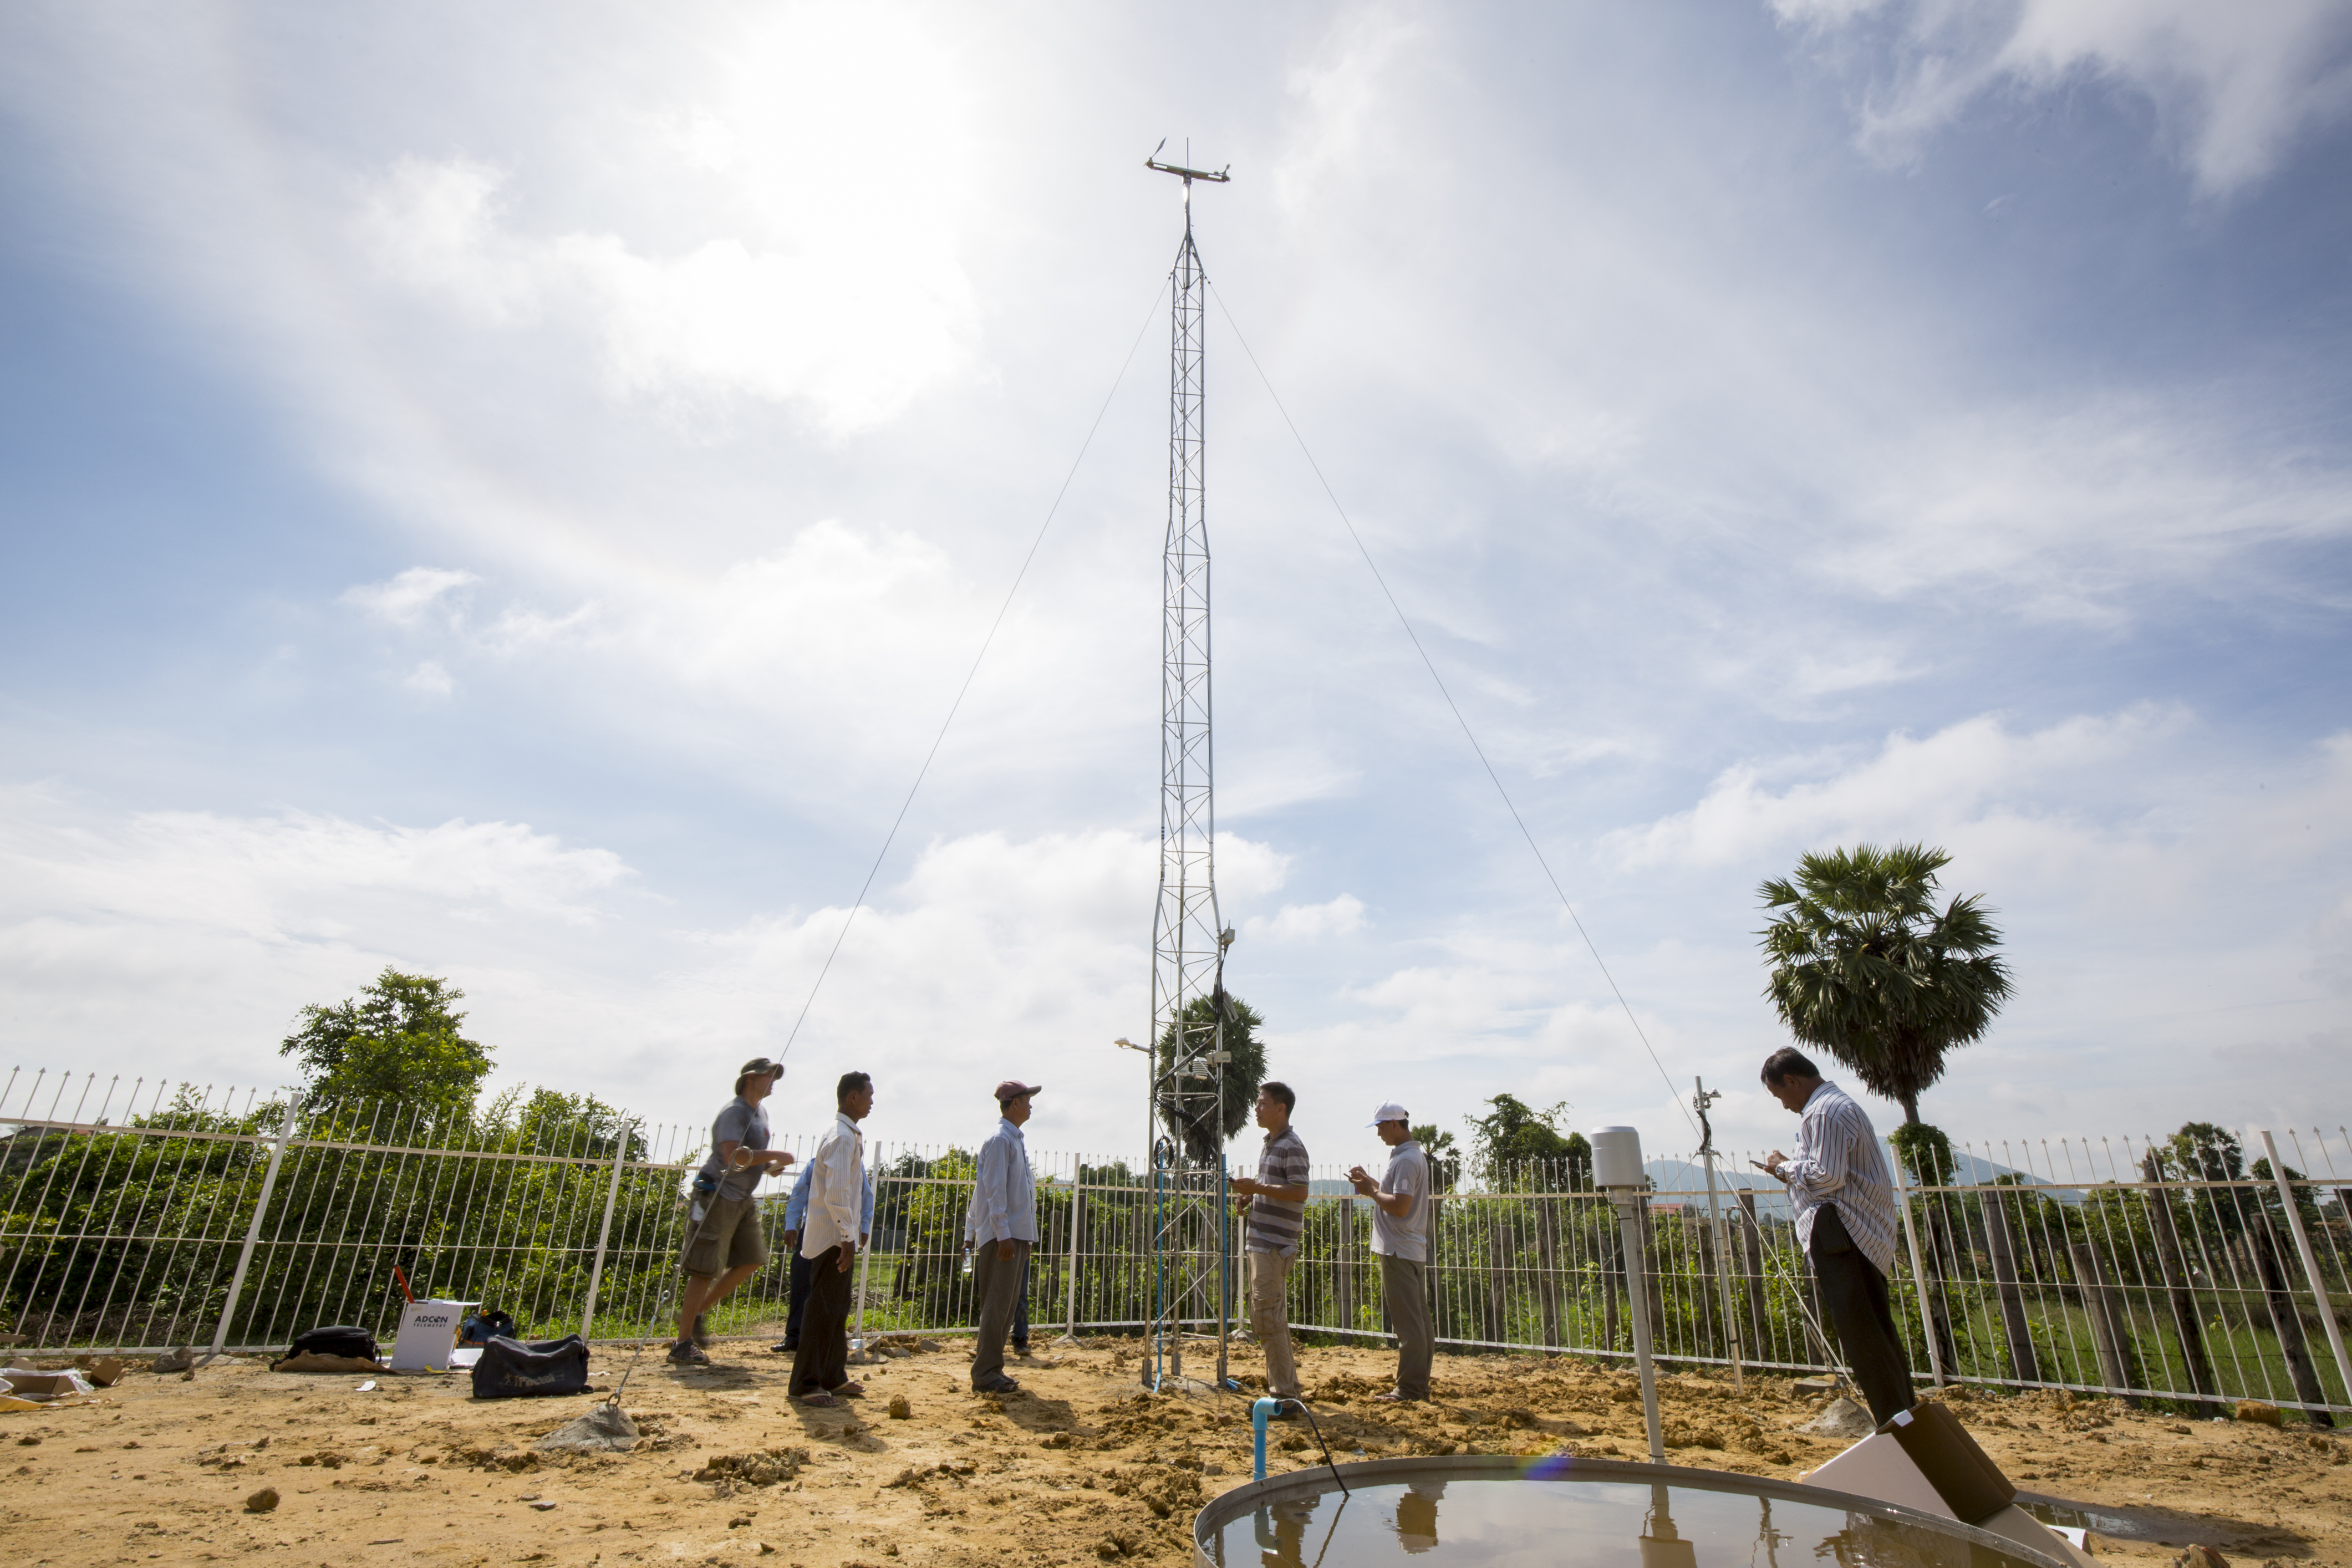 Installation of Automatic Weather Stations under the project ‘Strengthening Climate Information and Early Warning Systems in Cambodia’, supported by the UN Development Programme and the GEF Least Developed Countries Fund